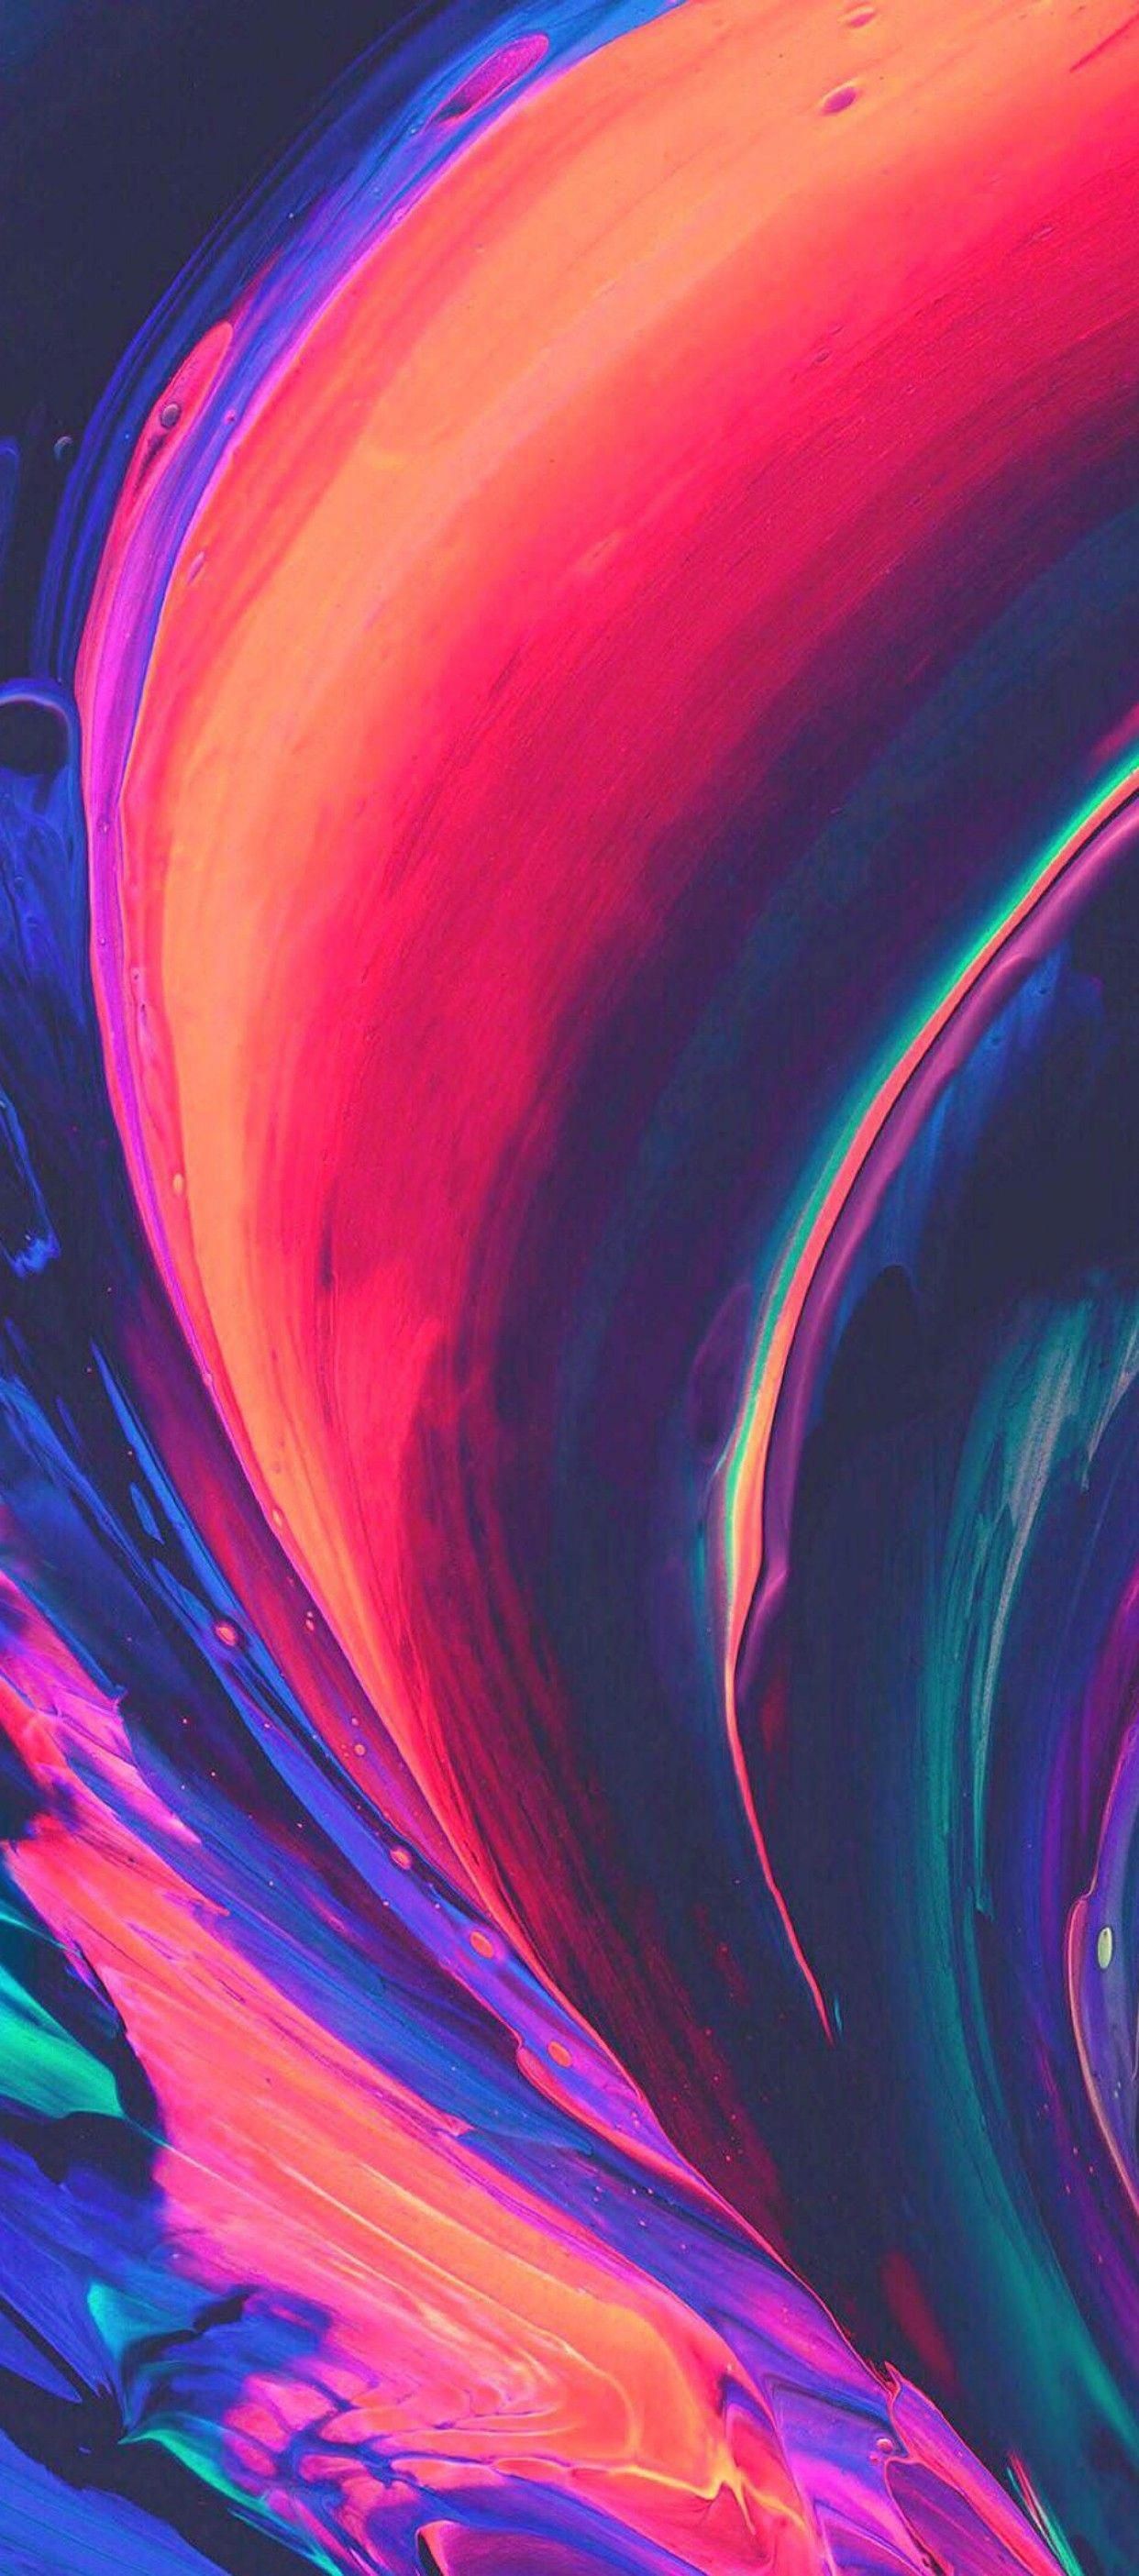 iOS iPhone X, purple, blue, clean, simple, abstract, apple, wallpaper, iphone clean, bea. Abstract iphone wallpaper, Abstract wallpaper, Painting wallpaper